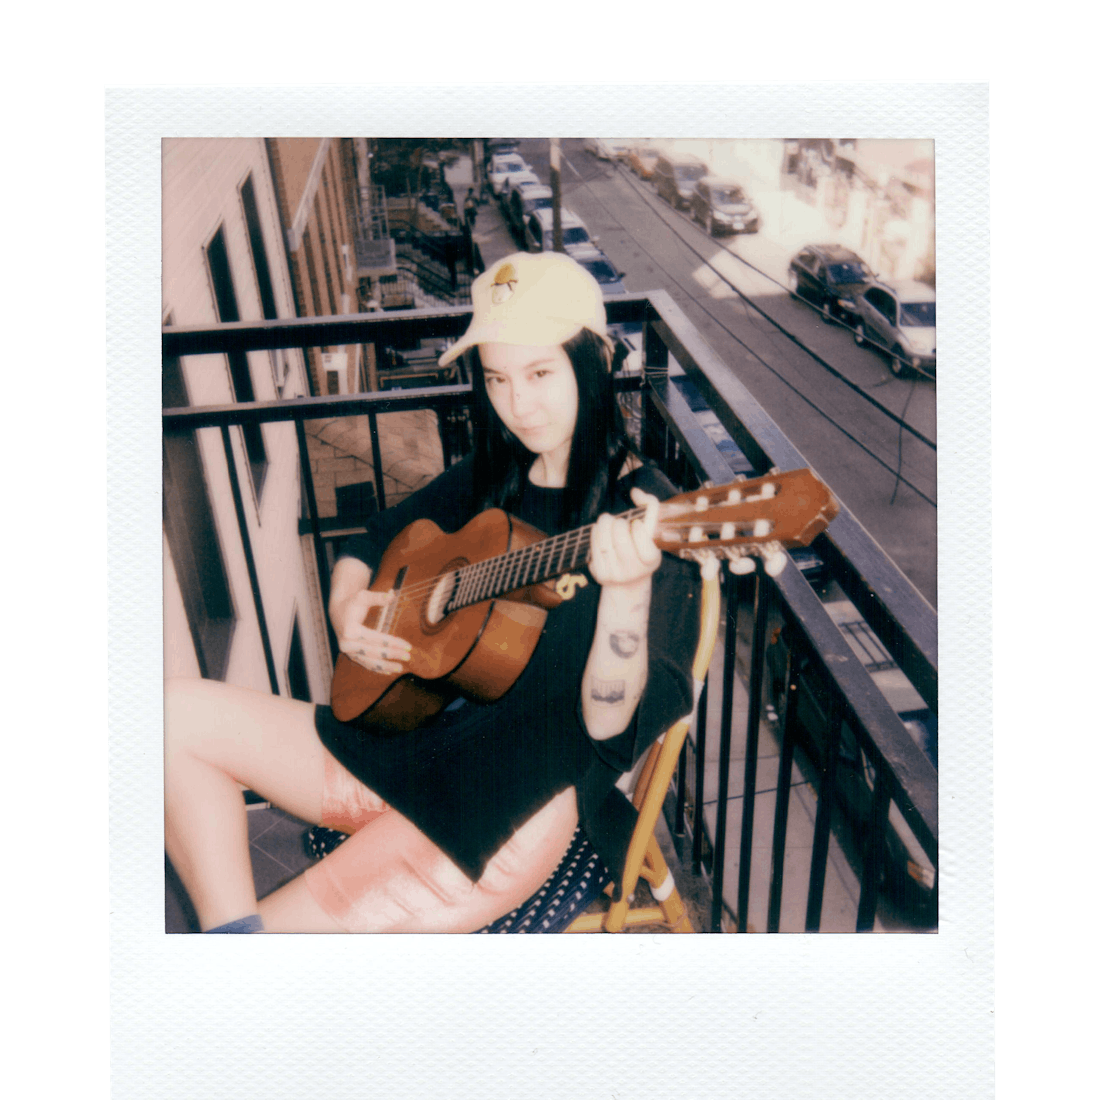 Michelle Zauner posing with a guitar on the balcony.